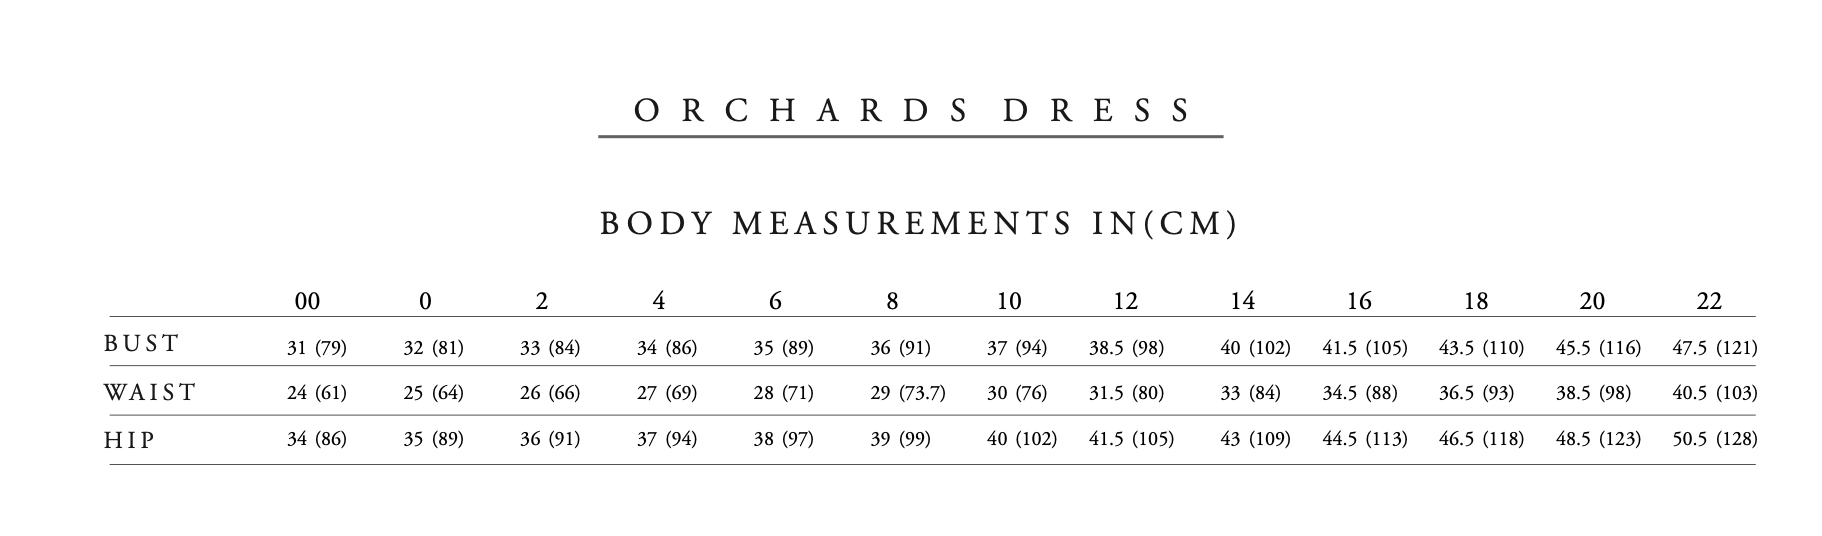 Vivian Shao Chen Orchards Dress Expansion